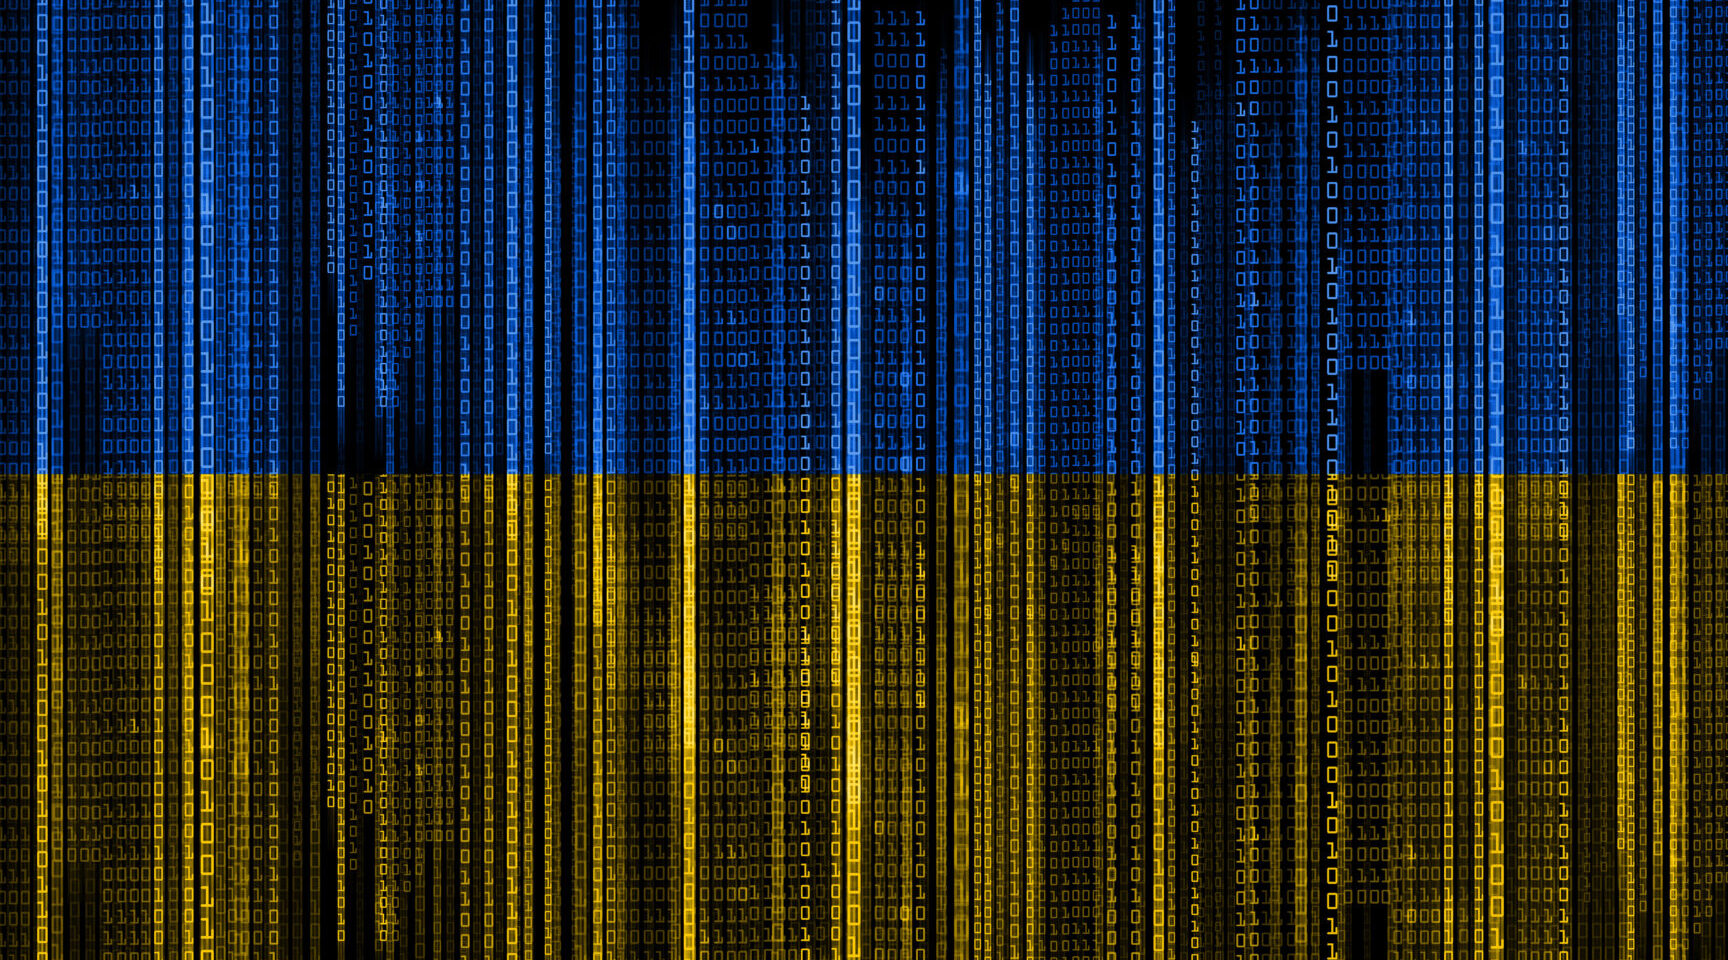 A flag of Ukraine made out of blue and yellow lines of binary code.